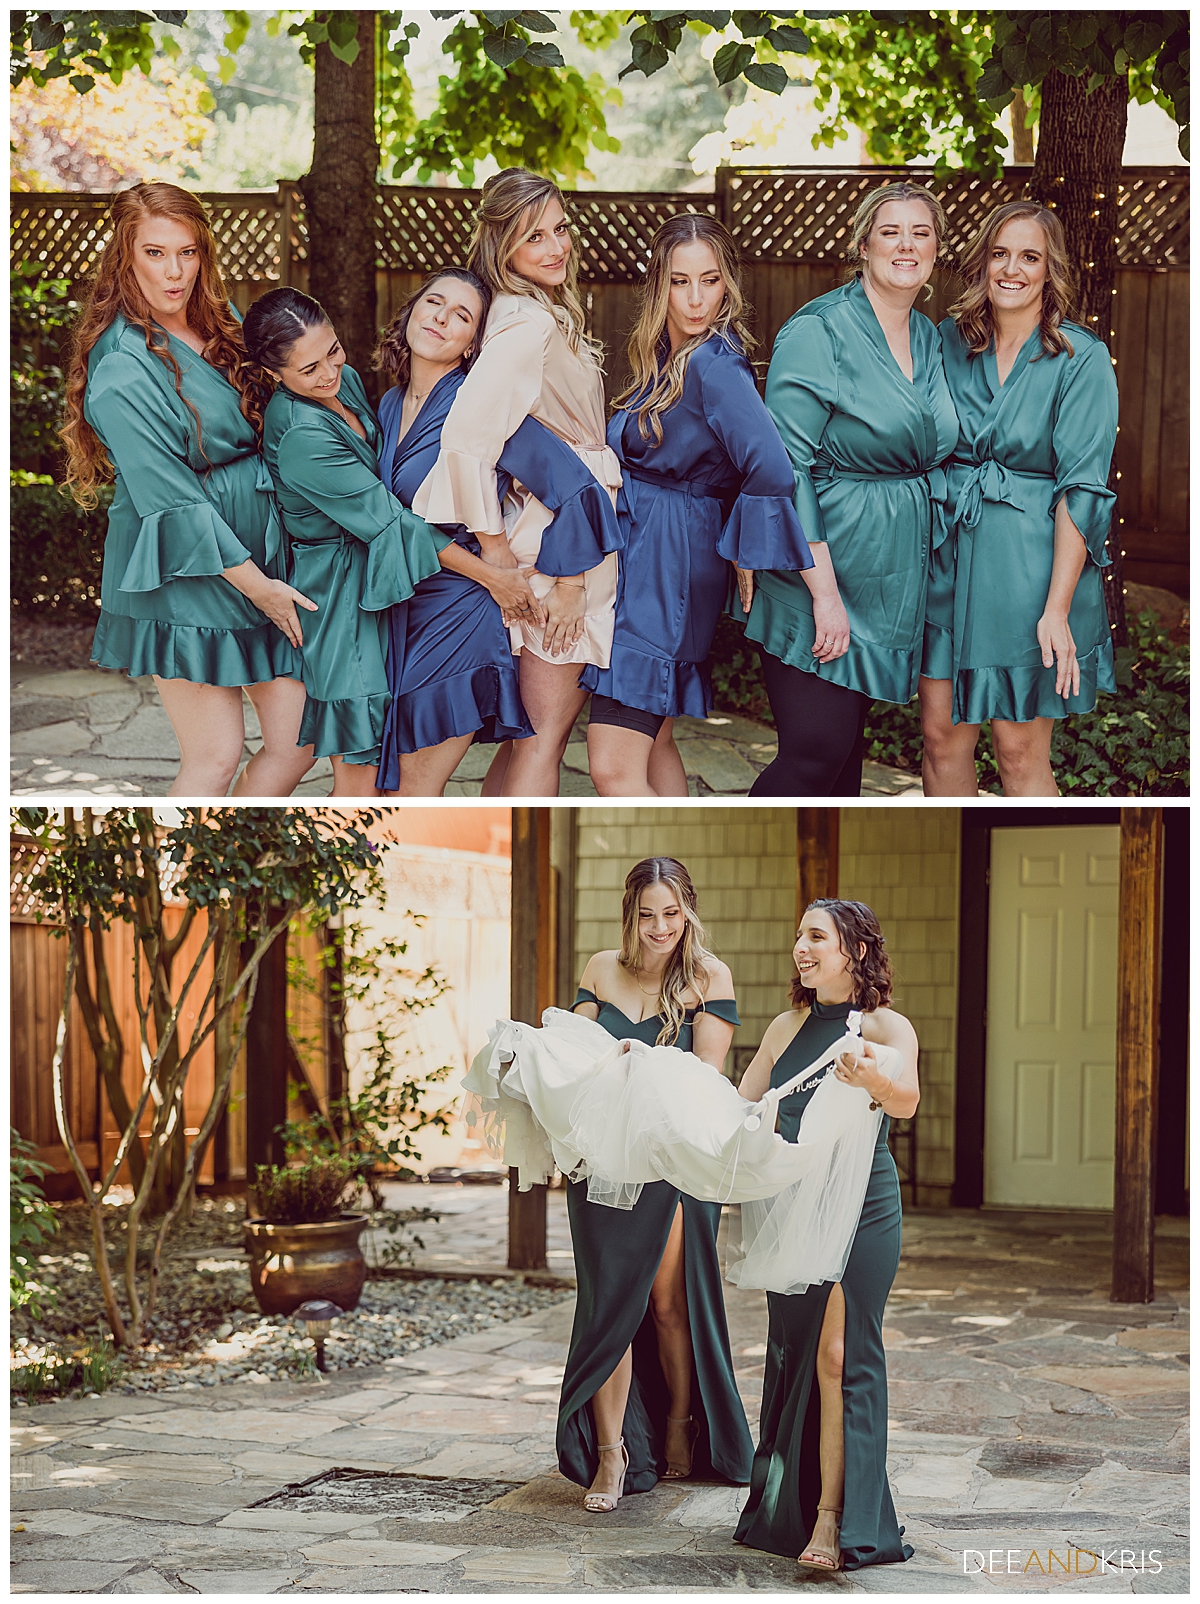 Two images of bride with bridesmaids in silk robes and bridesmaids bringing out bride's dress